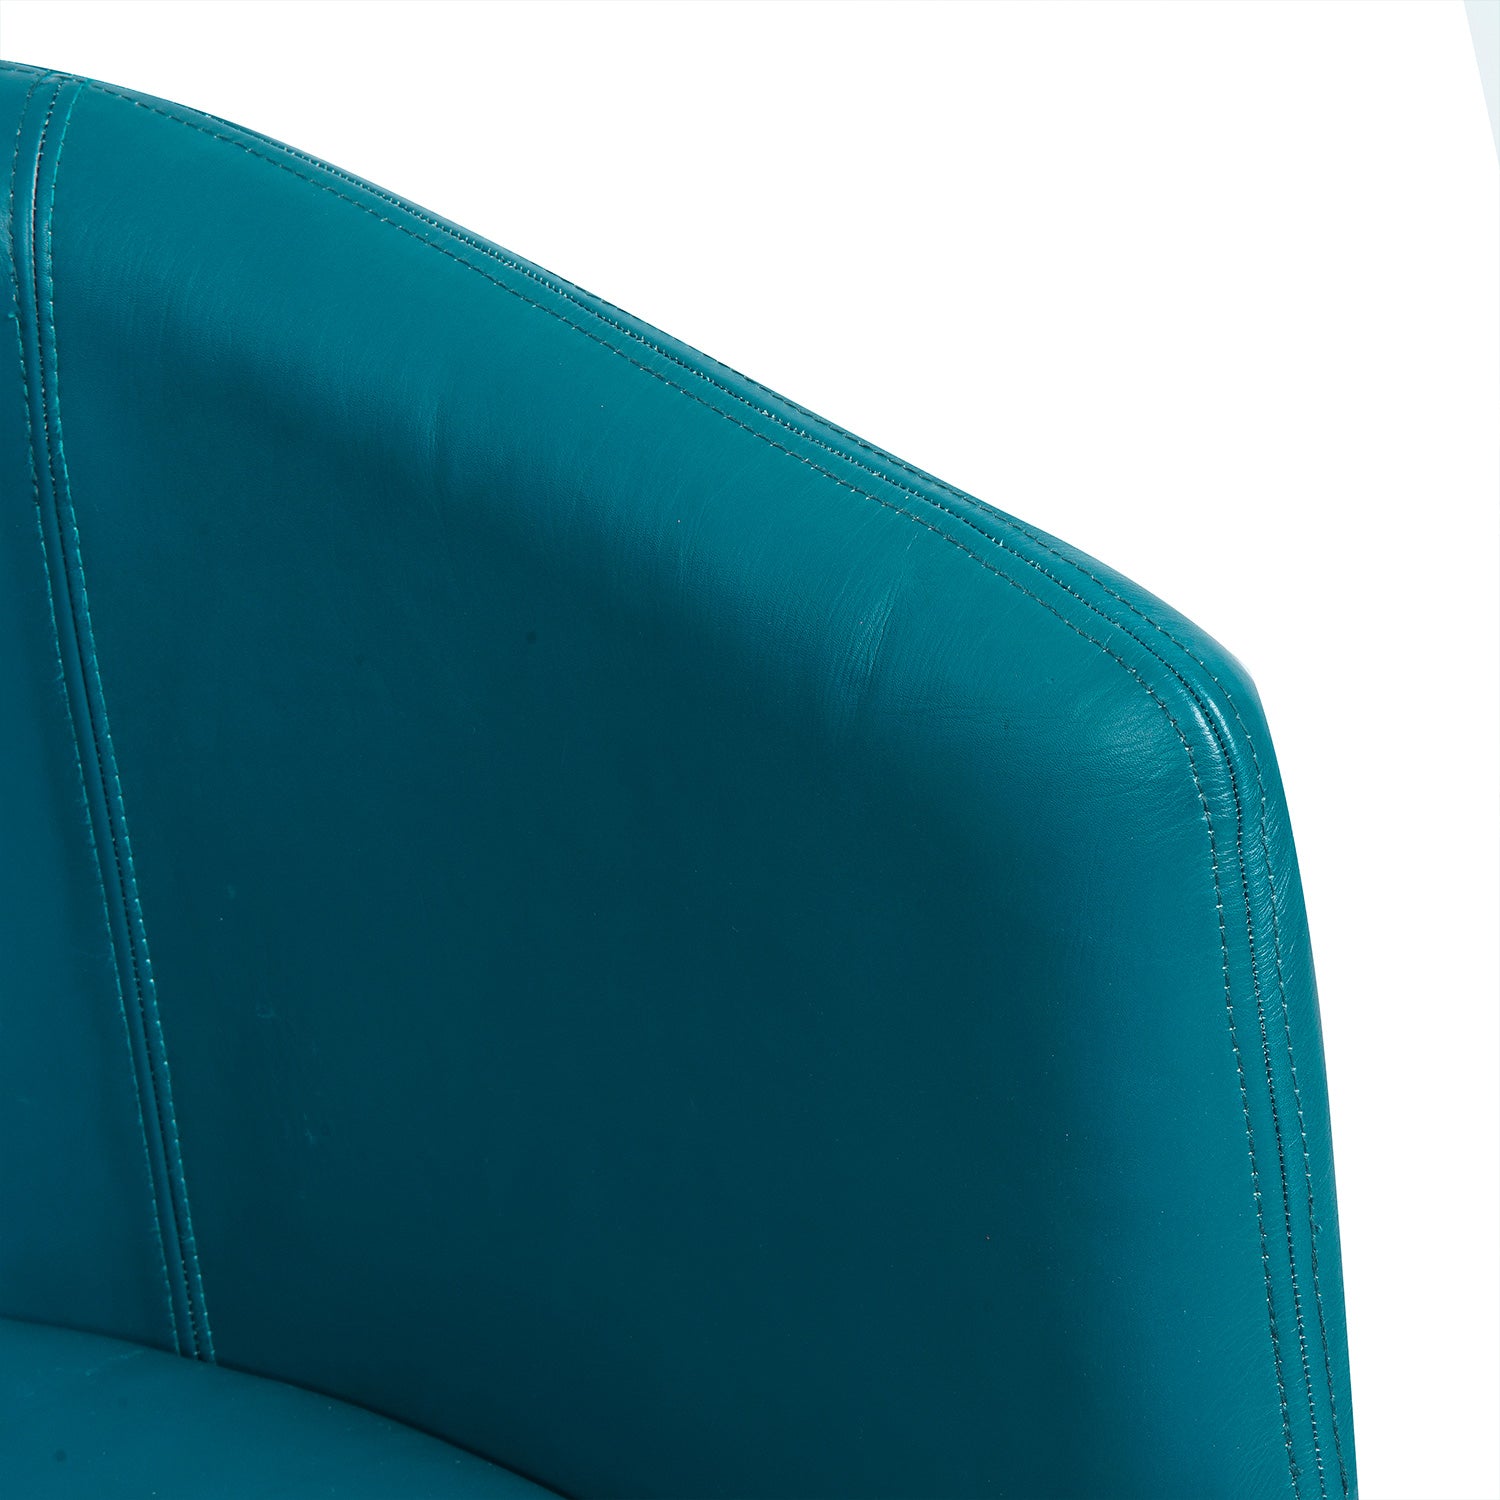 Juliet Sapi Leather Chair Teal Arm Close Up